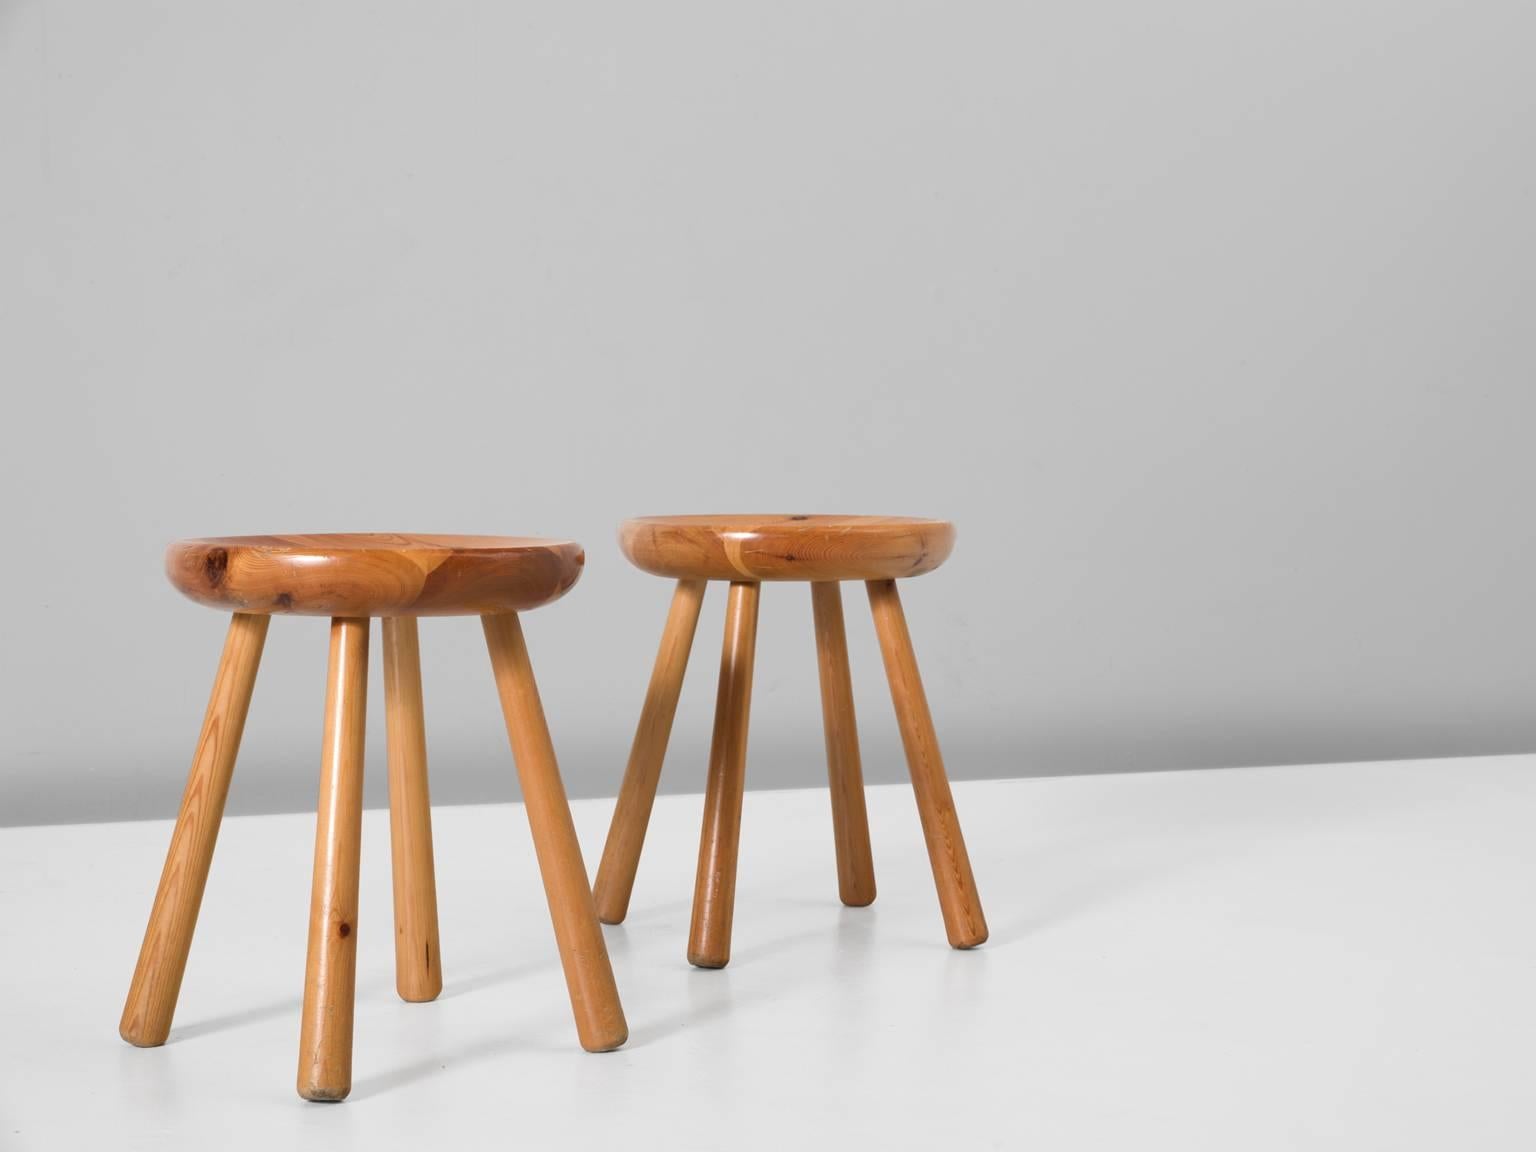 European Set of Four Stools in Solid Pine